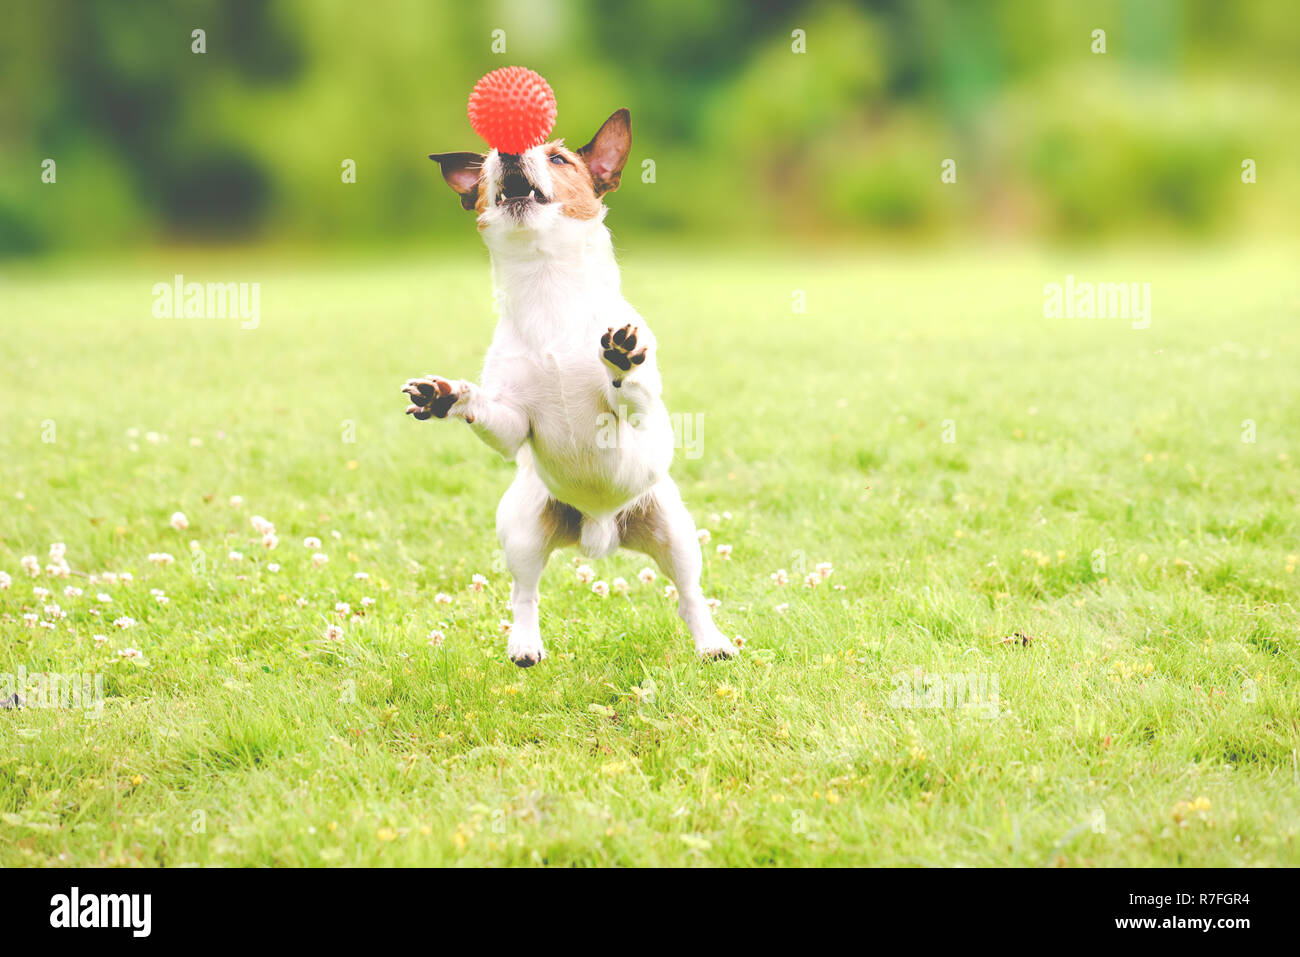 Funny dog catching toy ball rearing up and balancing with front paws Stock Photo